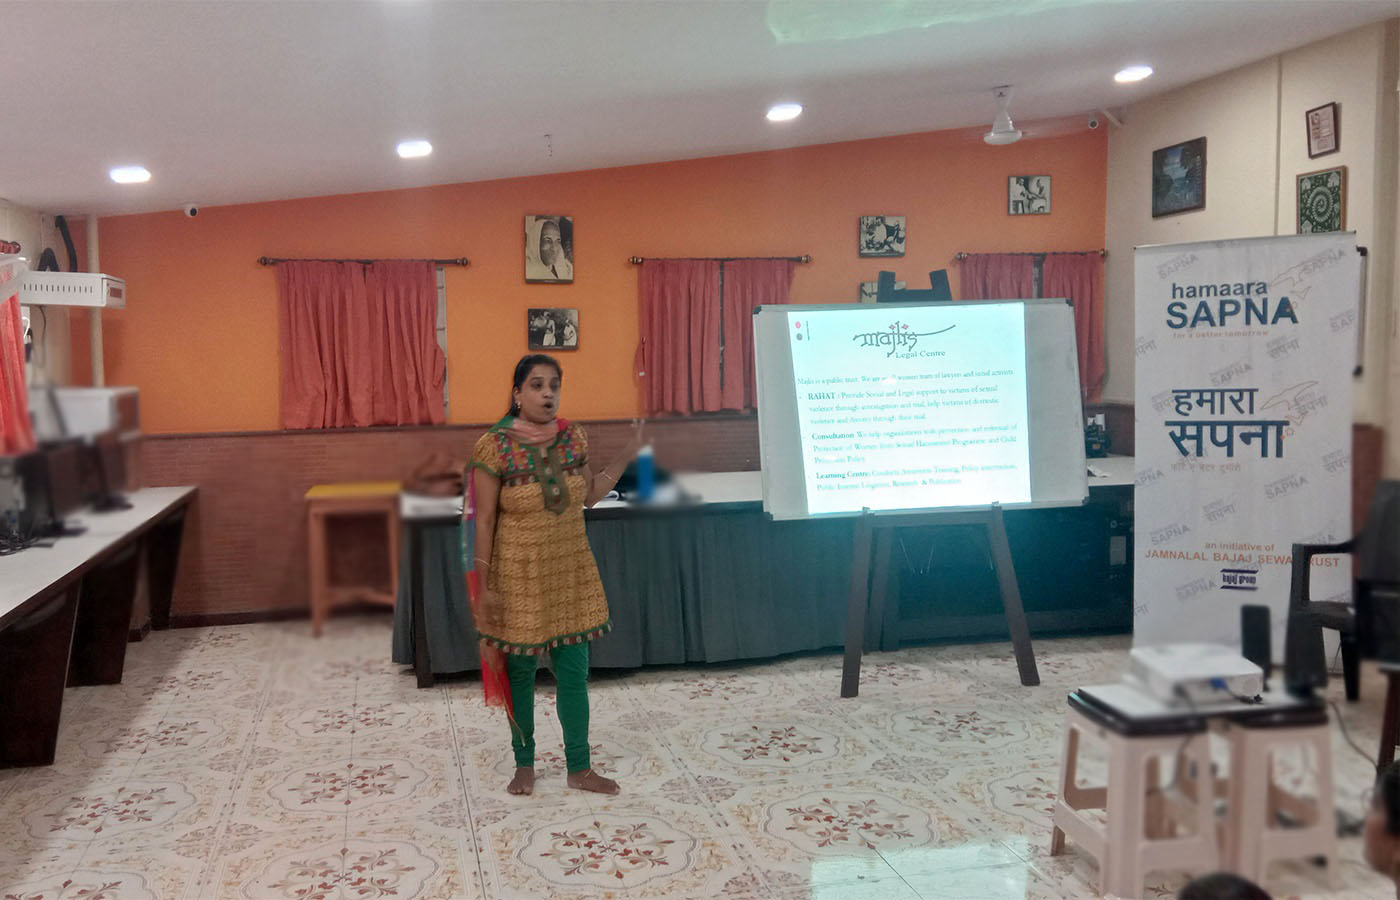 Ms. Sindhu Nair from Majlis creating awareness on Legal Rights of Women
